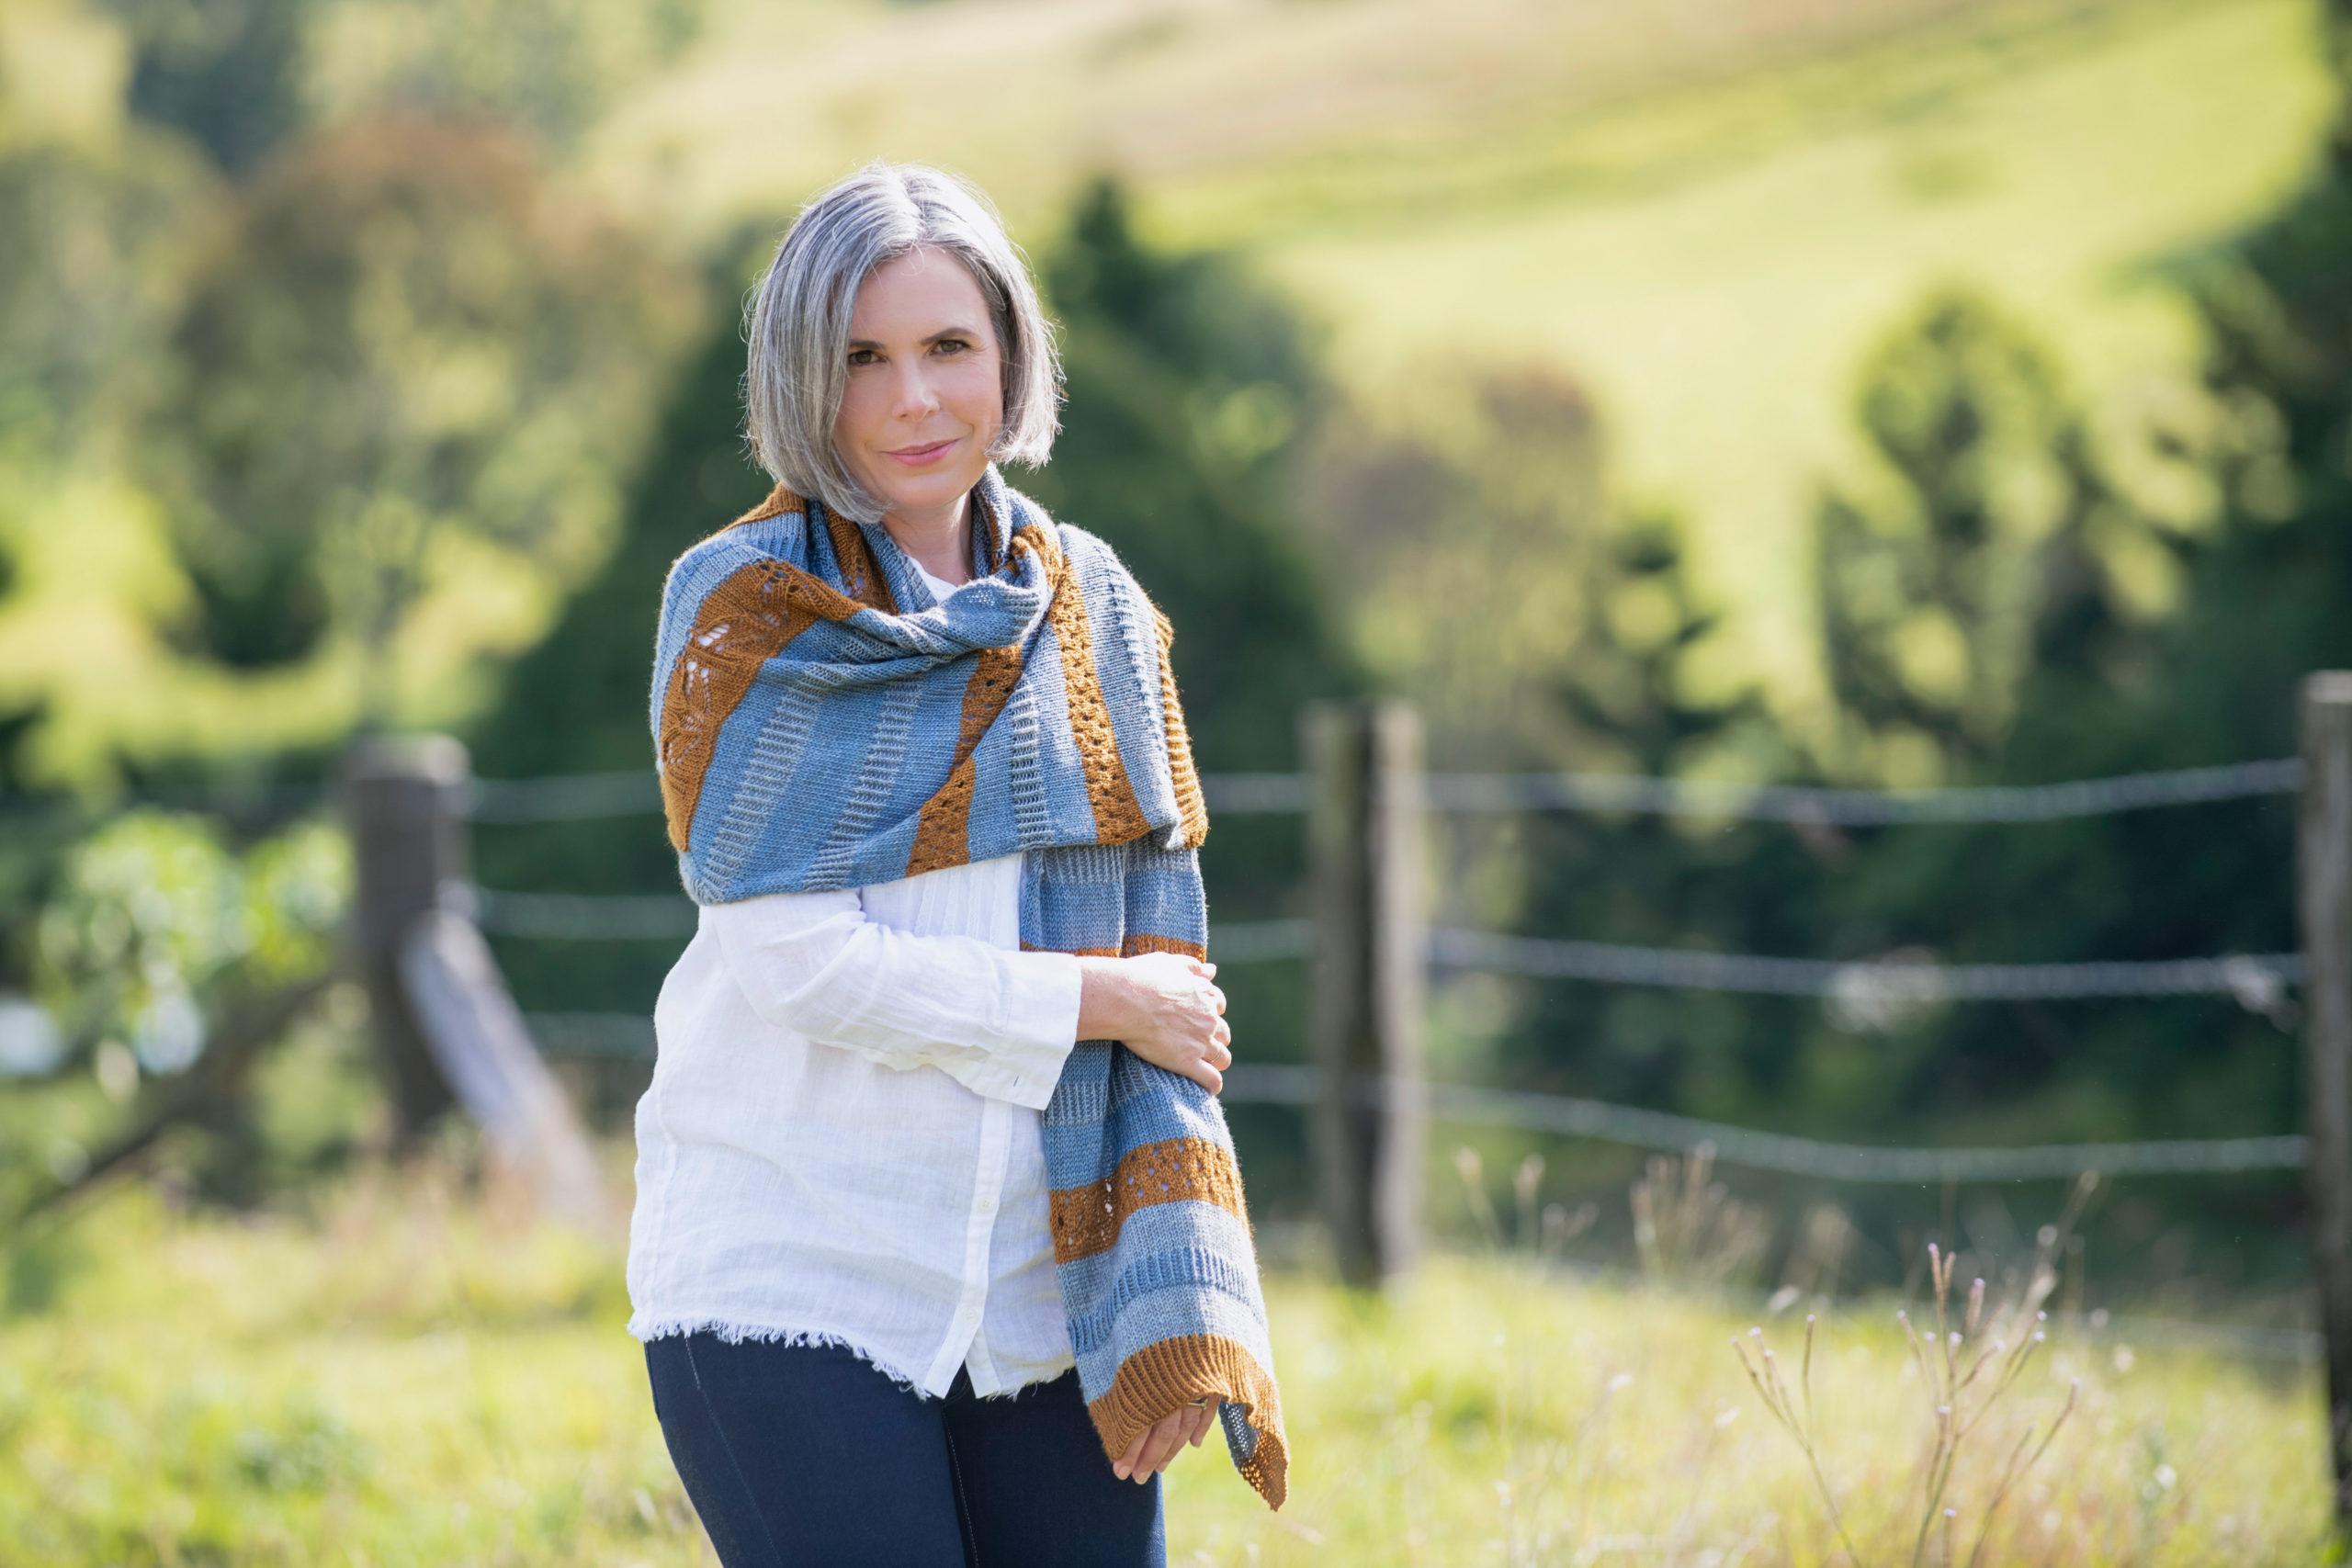 Helen stands in a green field, facing the camera wearing her own design The Wild Bees Wrap large rectangular hand knit wrap in blue, gold and grey yarns